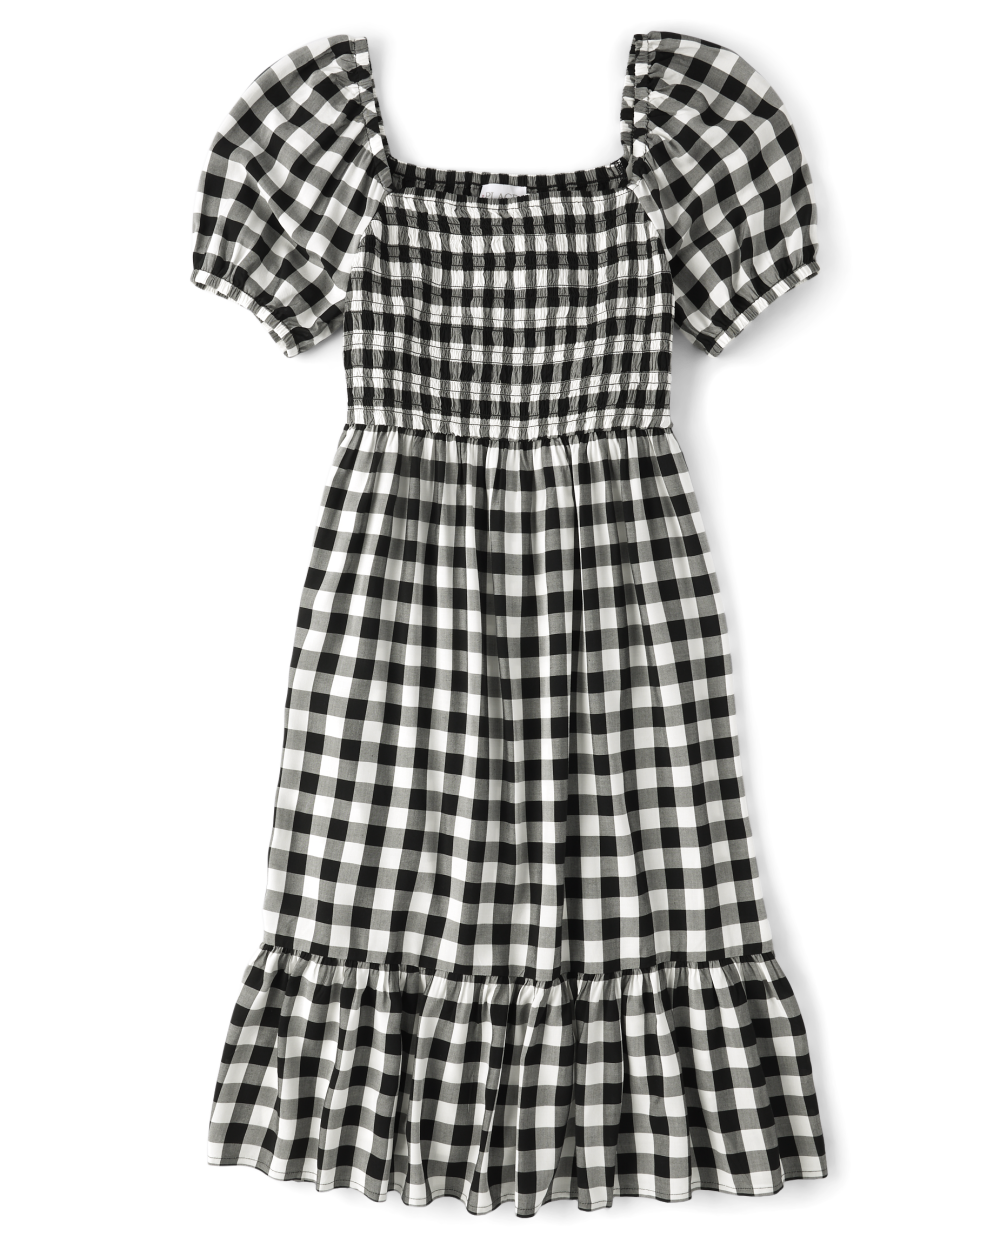 Rayon Smocked Square Neck Checkered Gingham Print Puff Sleeves Short Sleeves Sleeves Above the Knee Dress With Ruffles